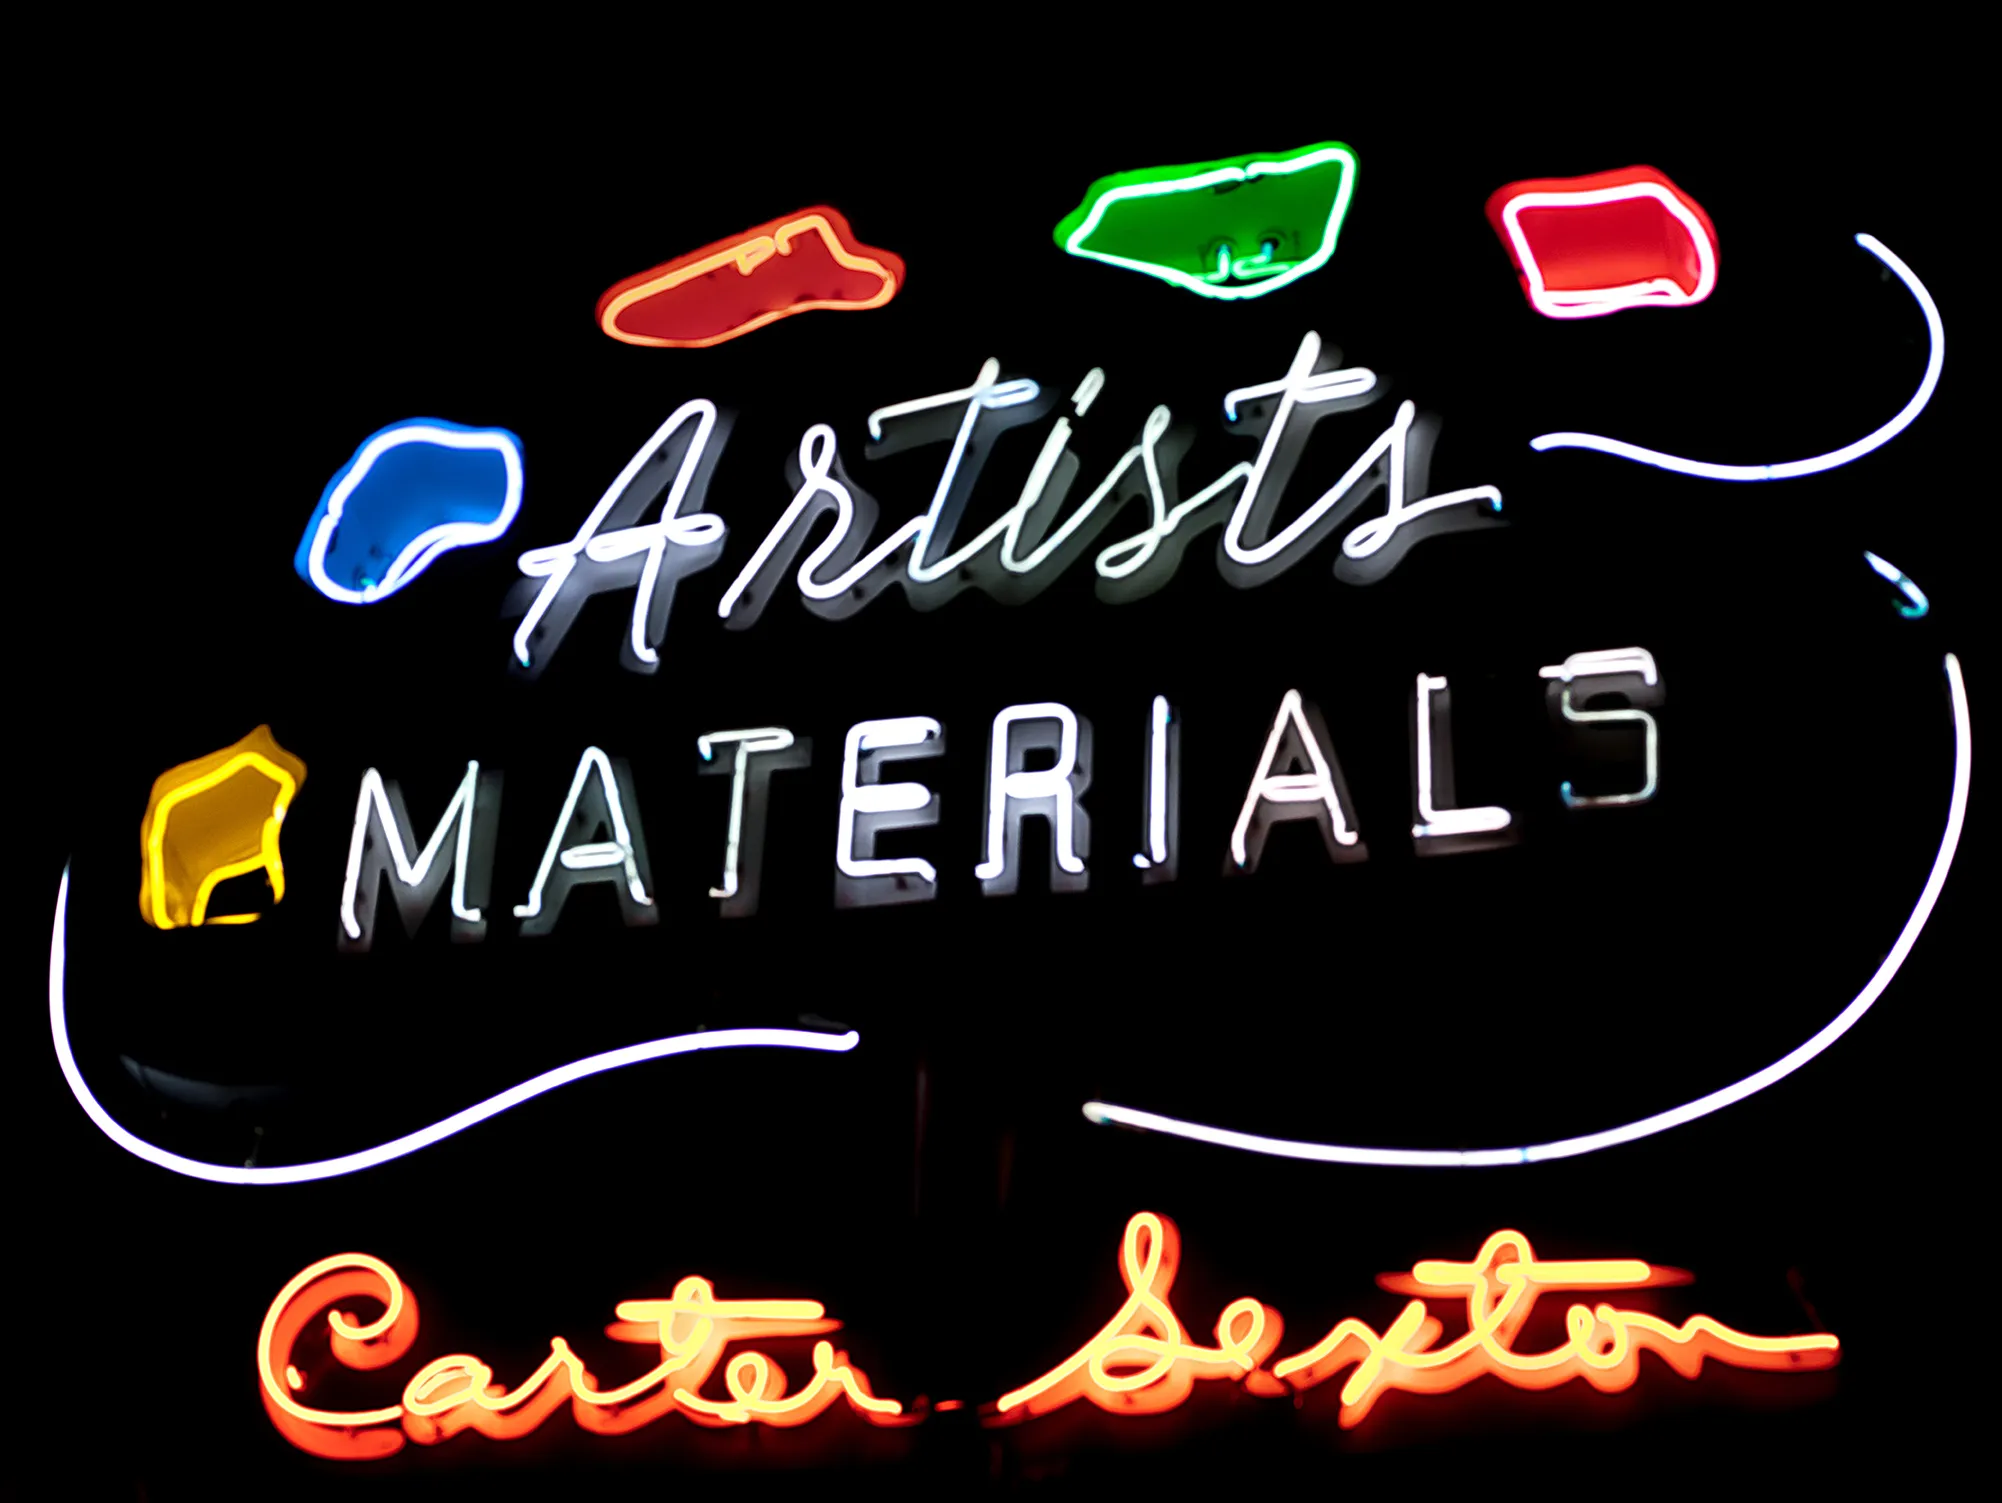 Carter Sexton Artists Materials in USA, north_america | Art - Country Helper